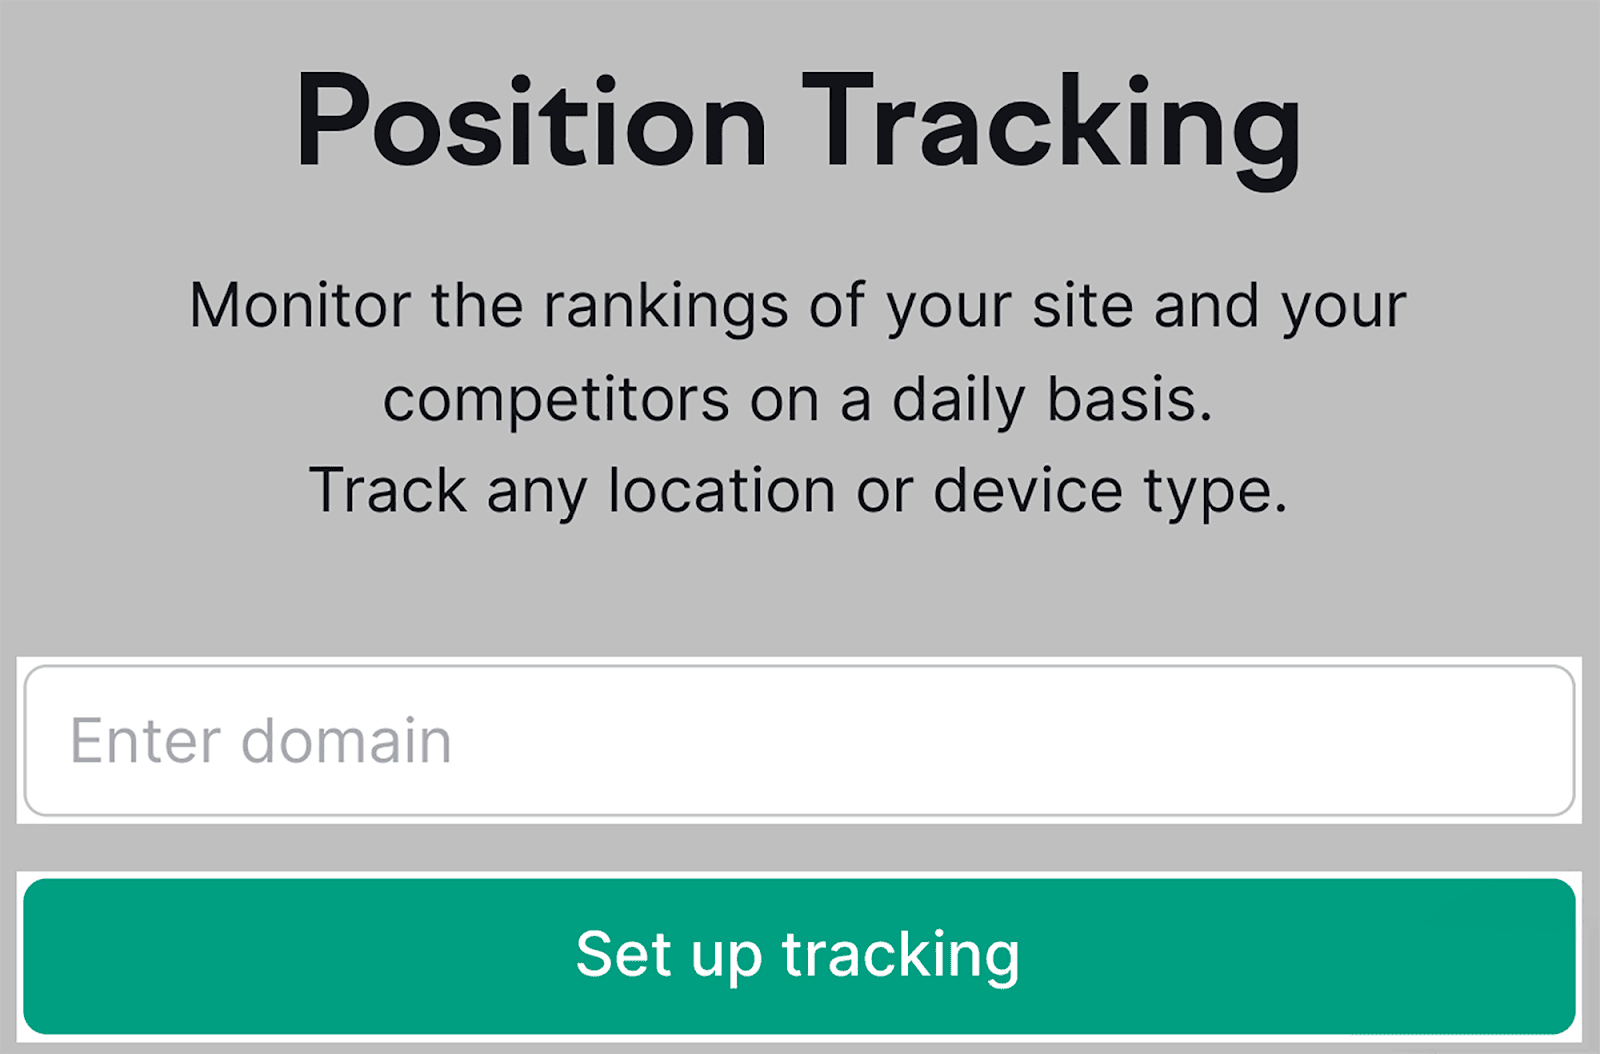 Enter domain and set up tracking